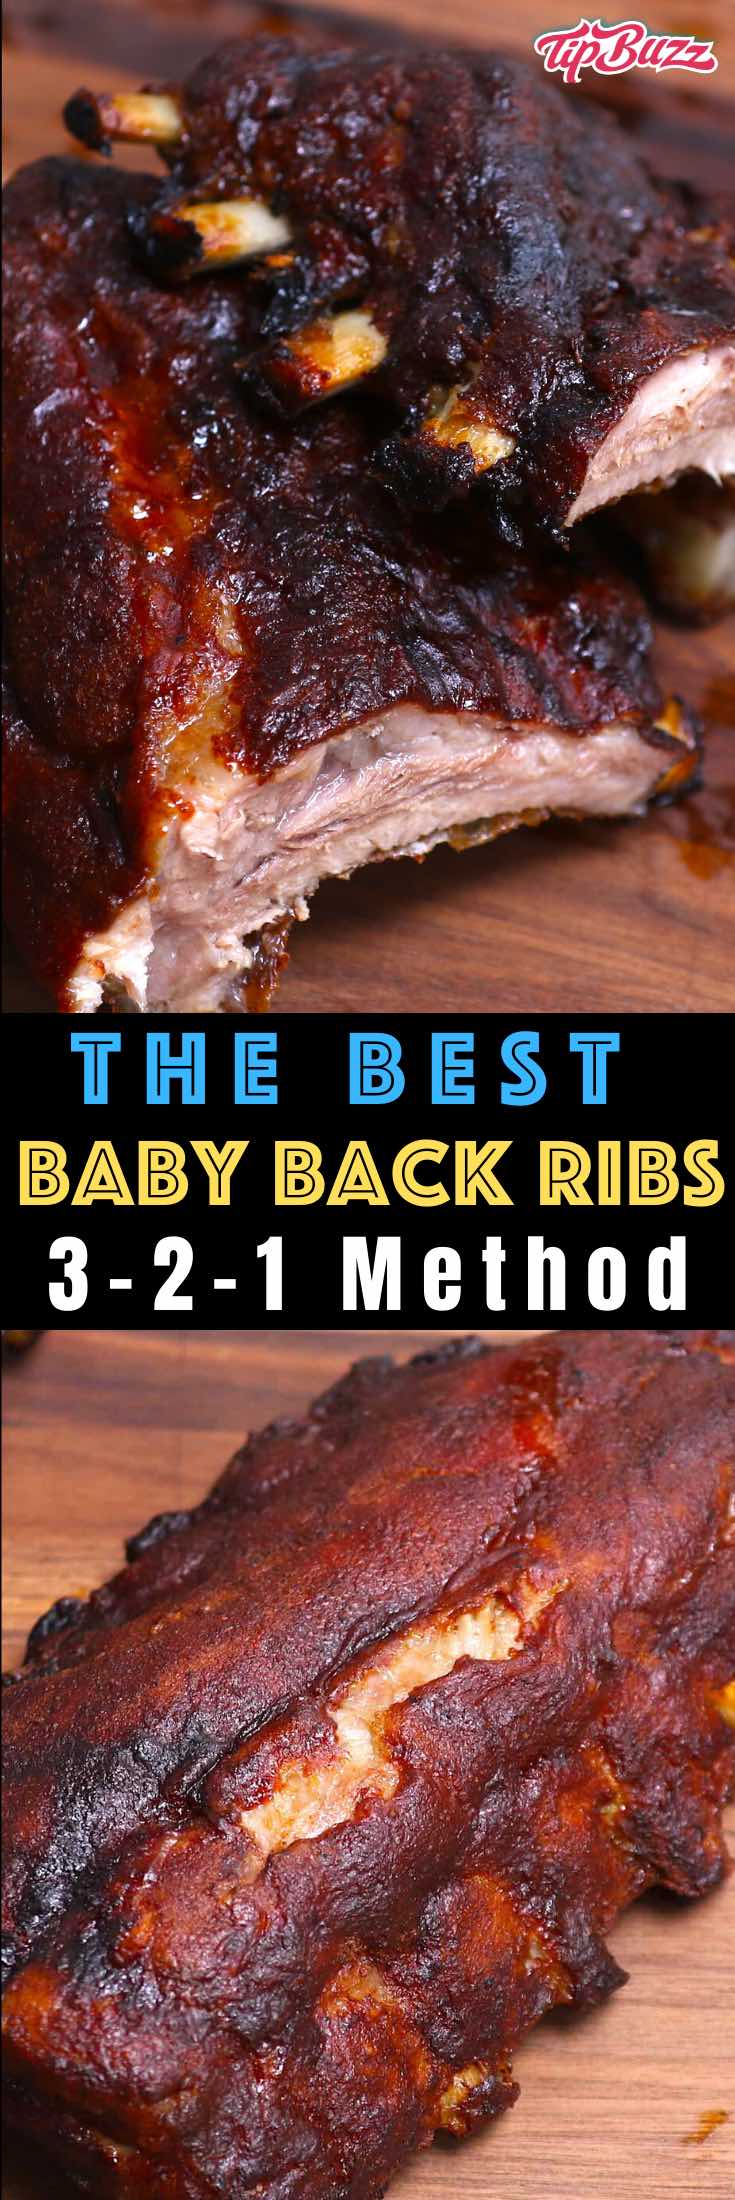 3 2 1 Ribs Tender And Juicy Barbecue Tipbuzz,Getting Rid Of Poison Ivy Blisters